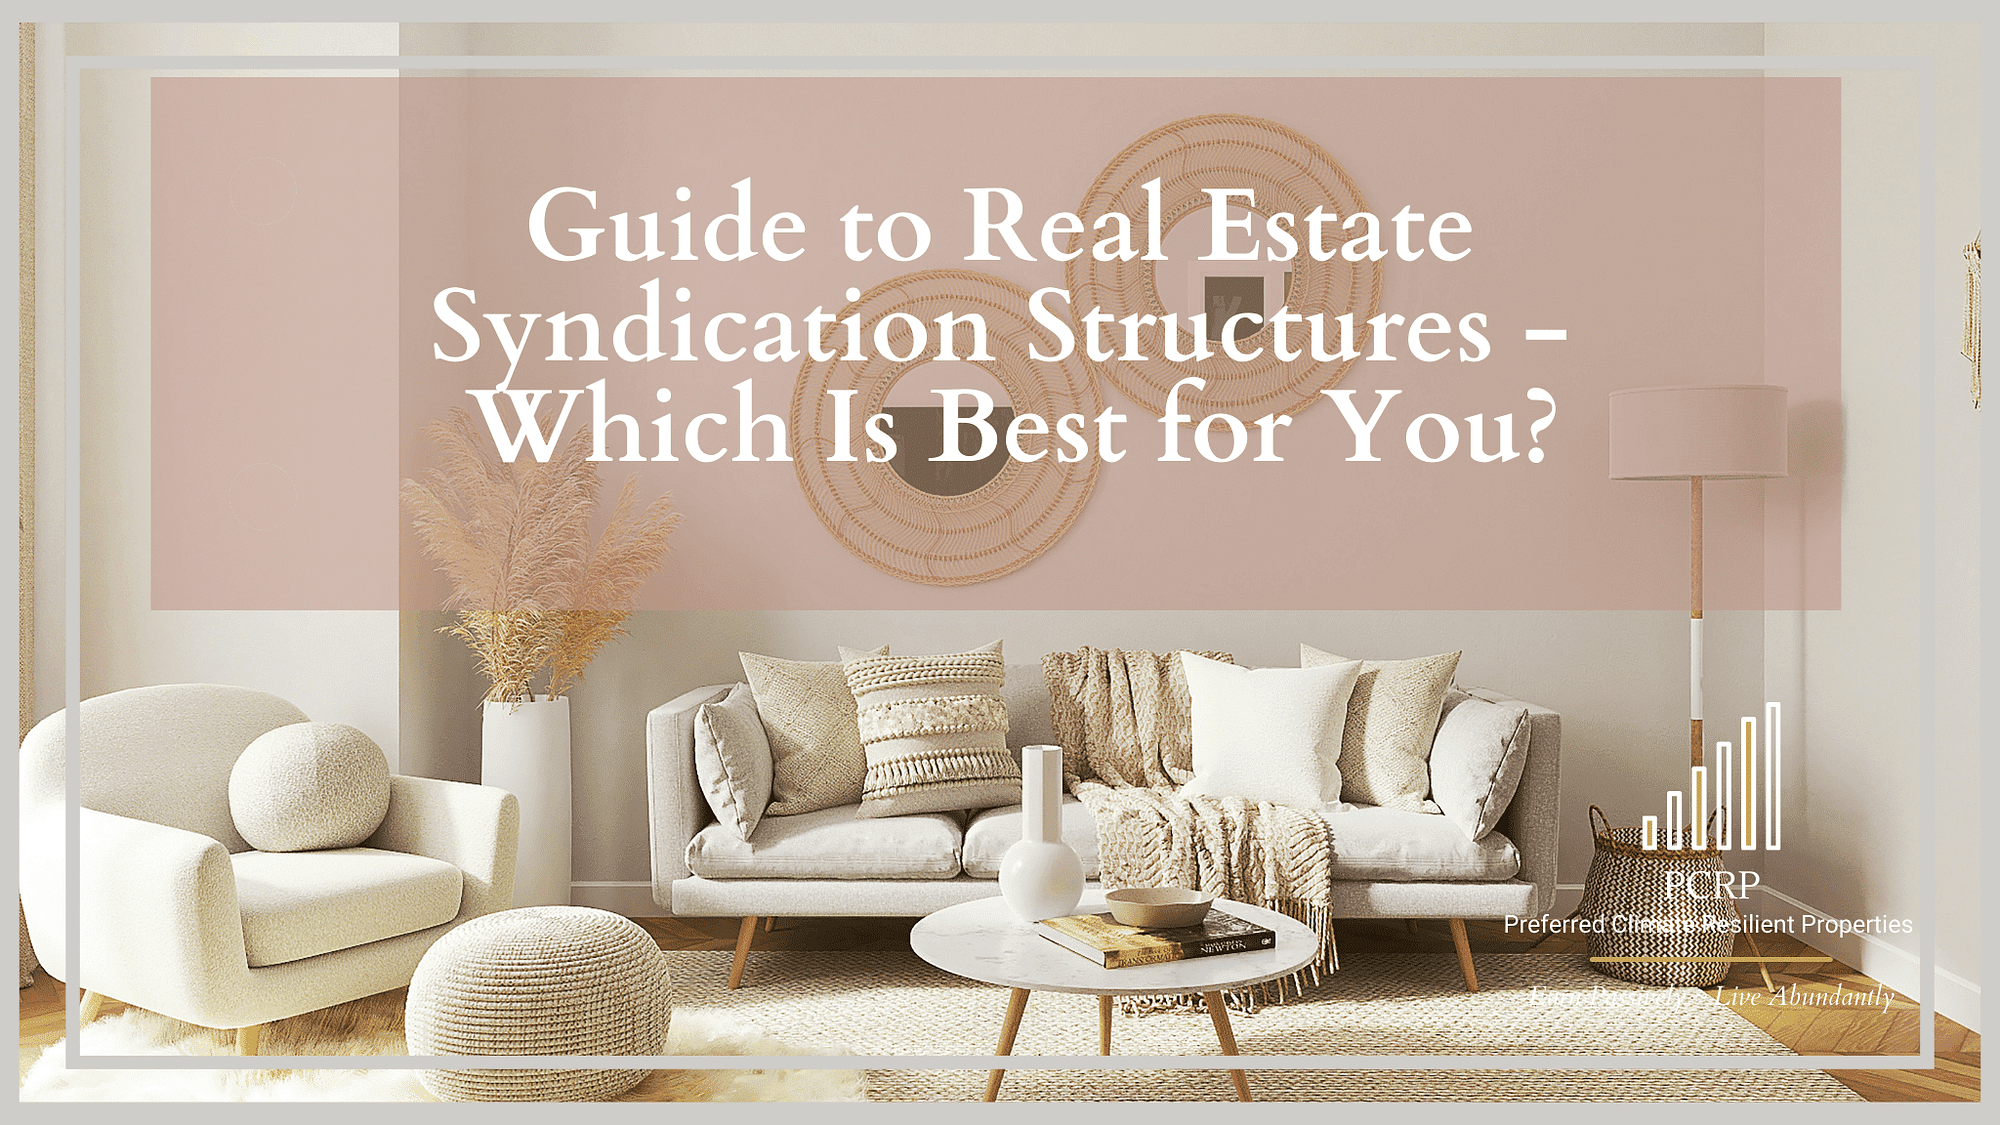 Guide to real estate syndication structures